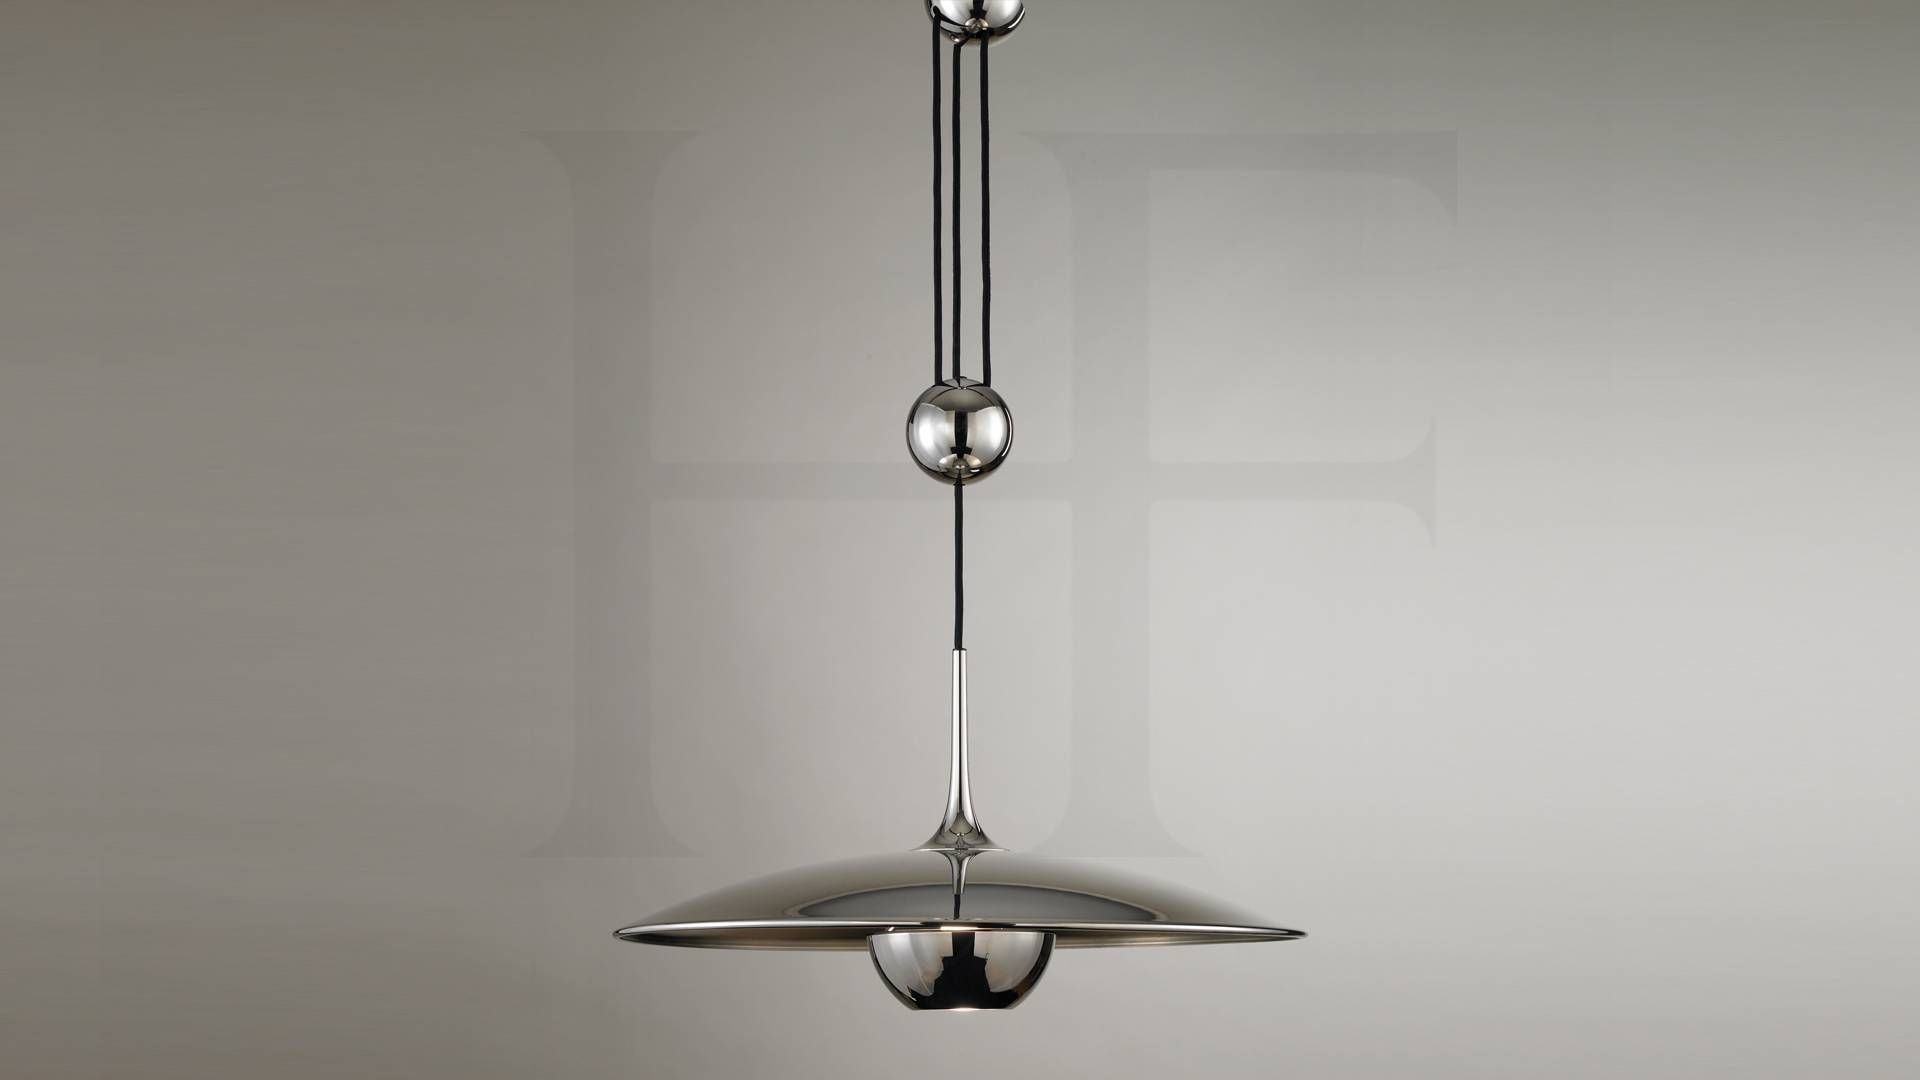 Onos 55 M Adjustable Pendant Lamp, Centre Pullhector Finch Pertaining To Pull Down Pendant Lighting (View 8 of 15)